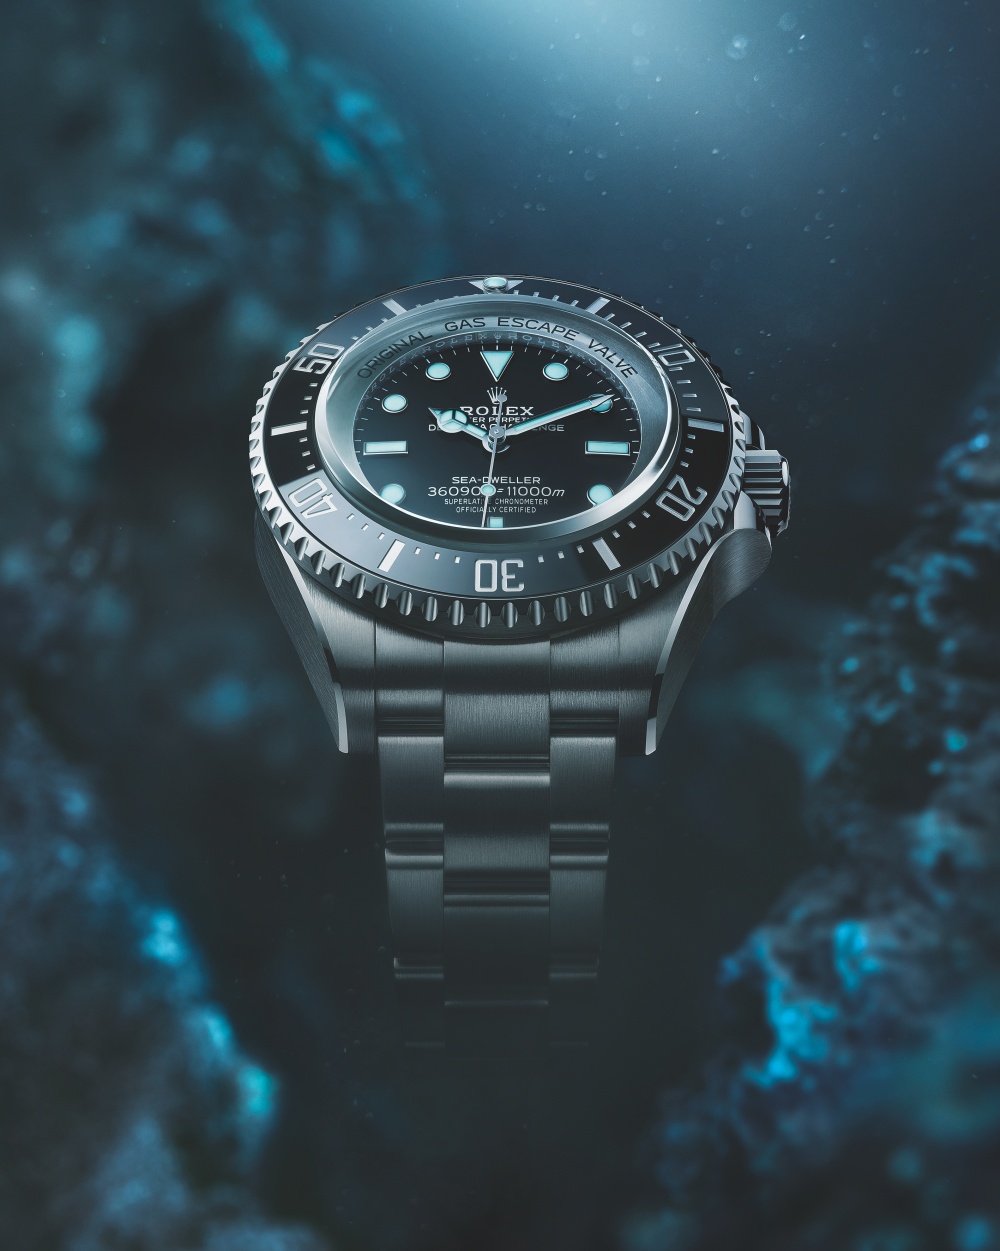 Đồng hồ Rolex Oyster Perpetual Deepsea Challenge